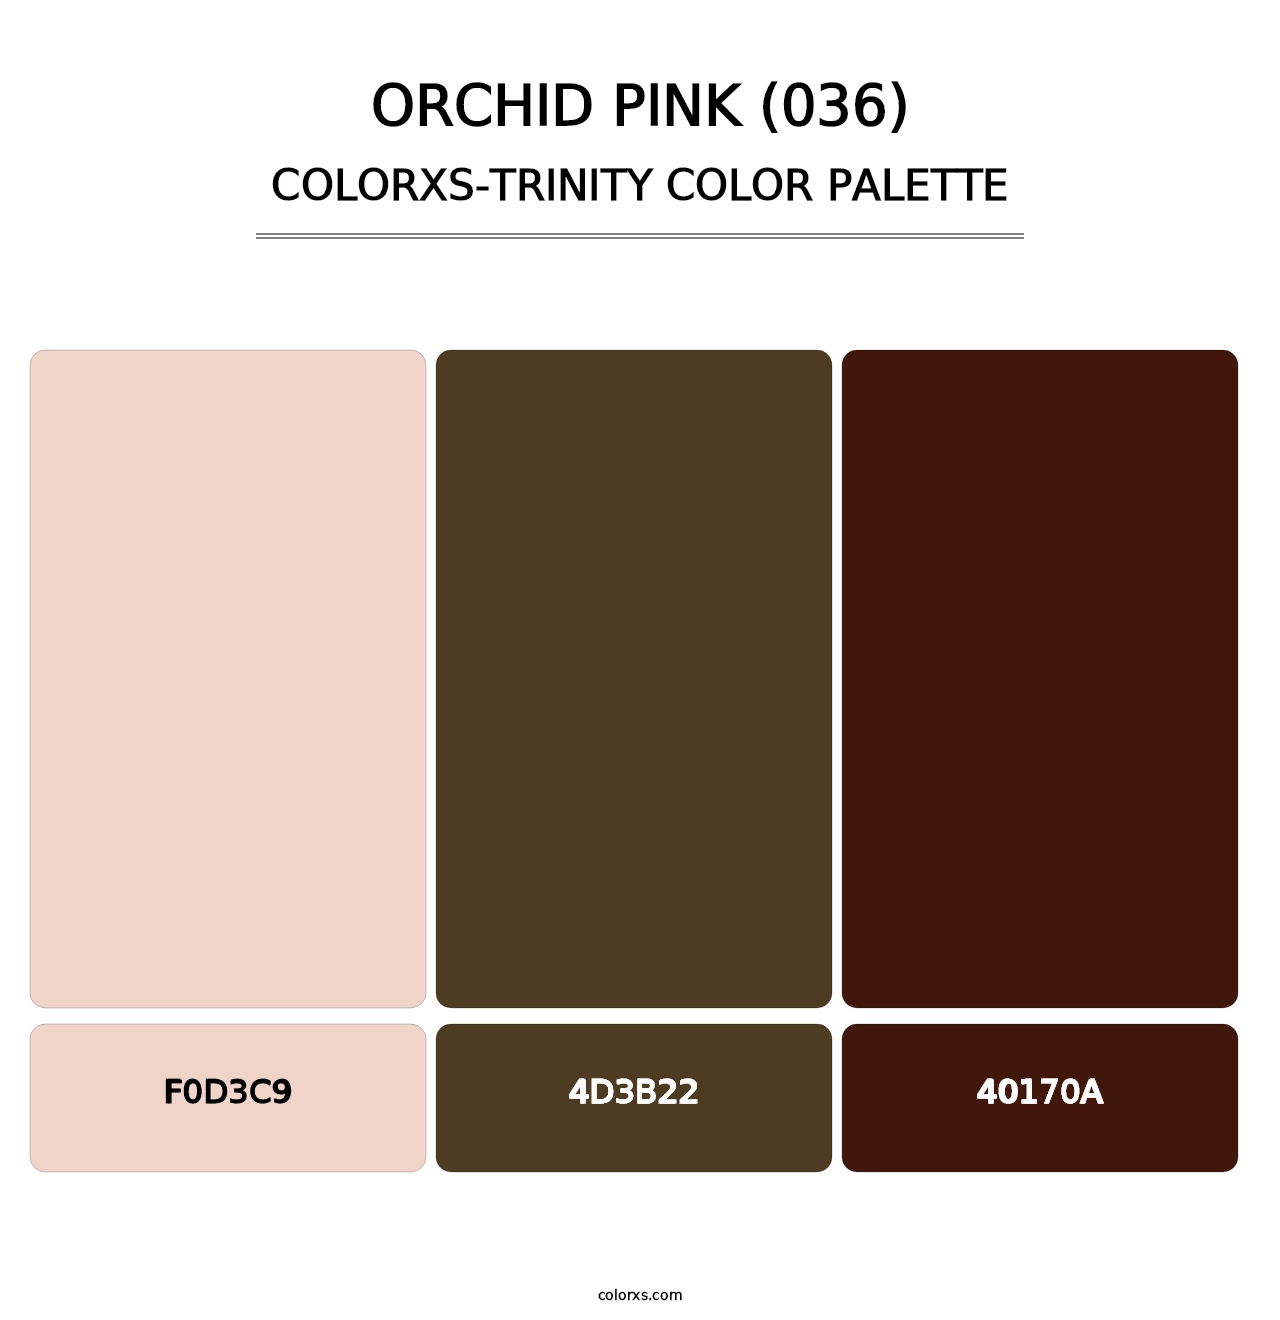 Orchid Pink (036) - Colorxs Trinity Palette